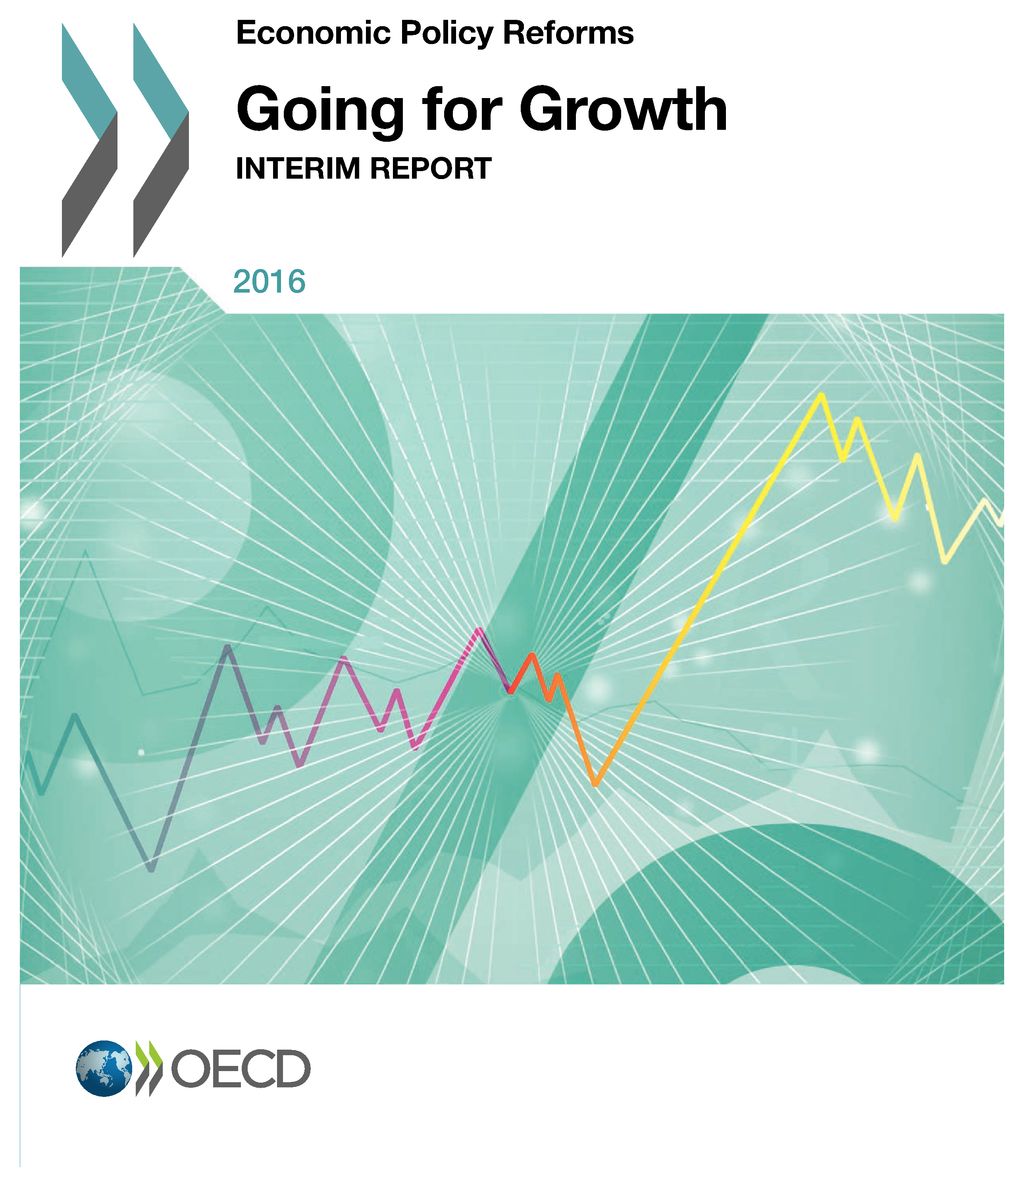 Economic policy reforms 2016 : going for growth interim report 책표지